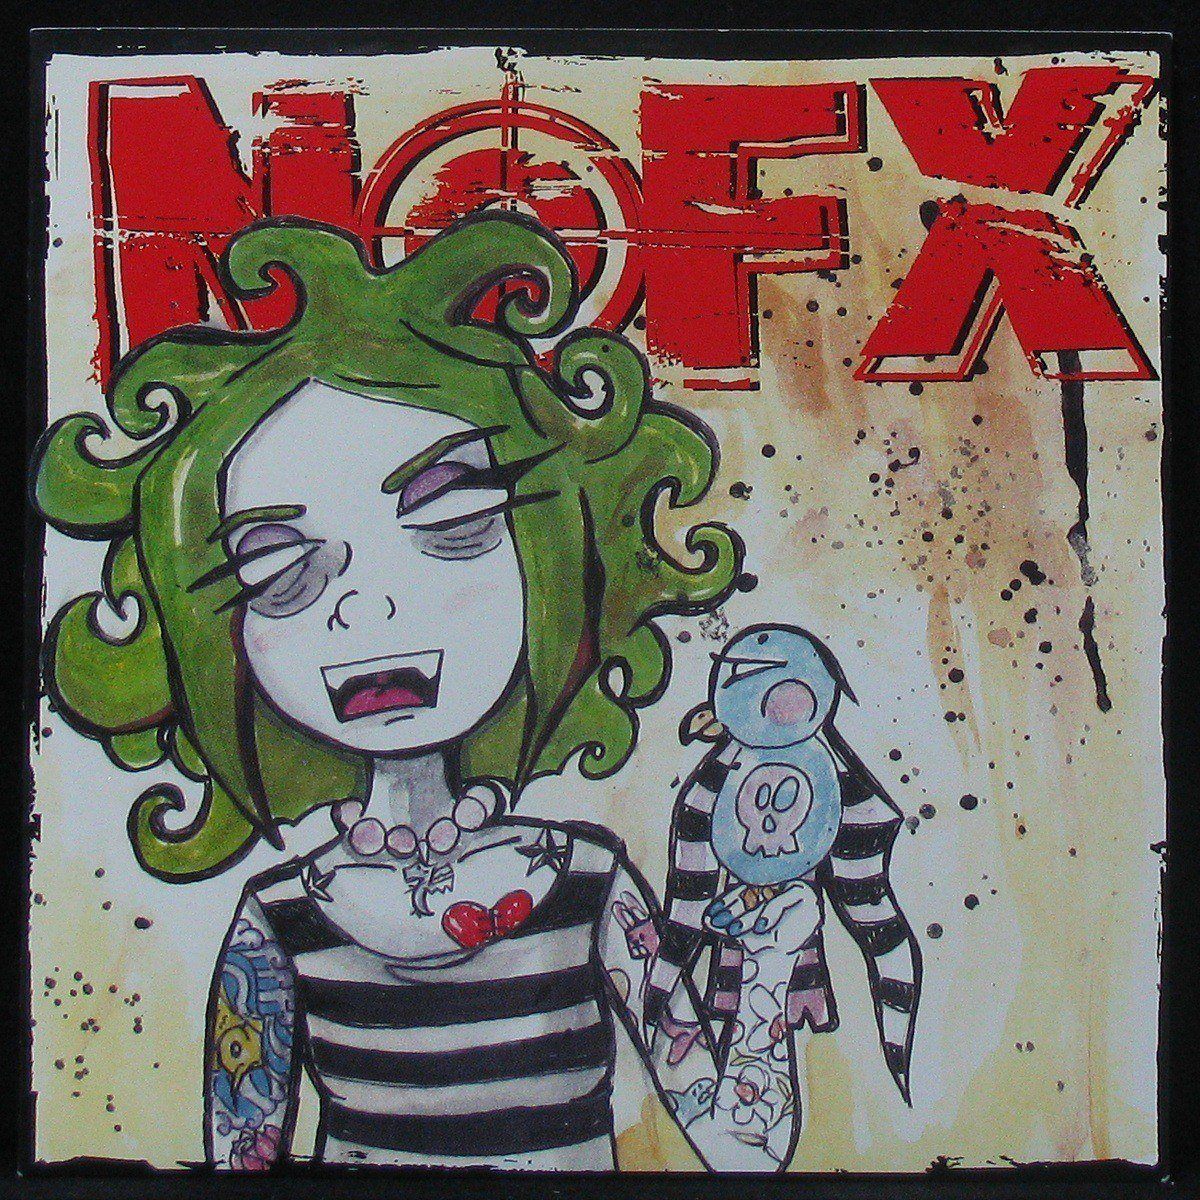 LP Nofx - 7 Inch Of The Month Club #7 (coloured vinyl,single,club edition) (302876) 